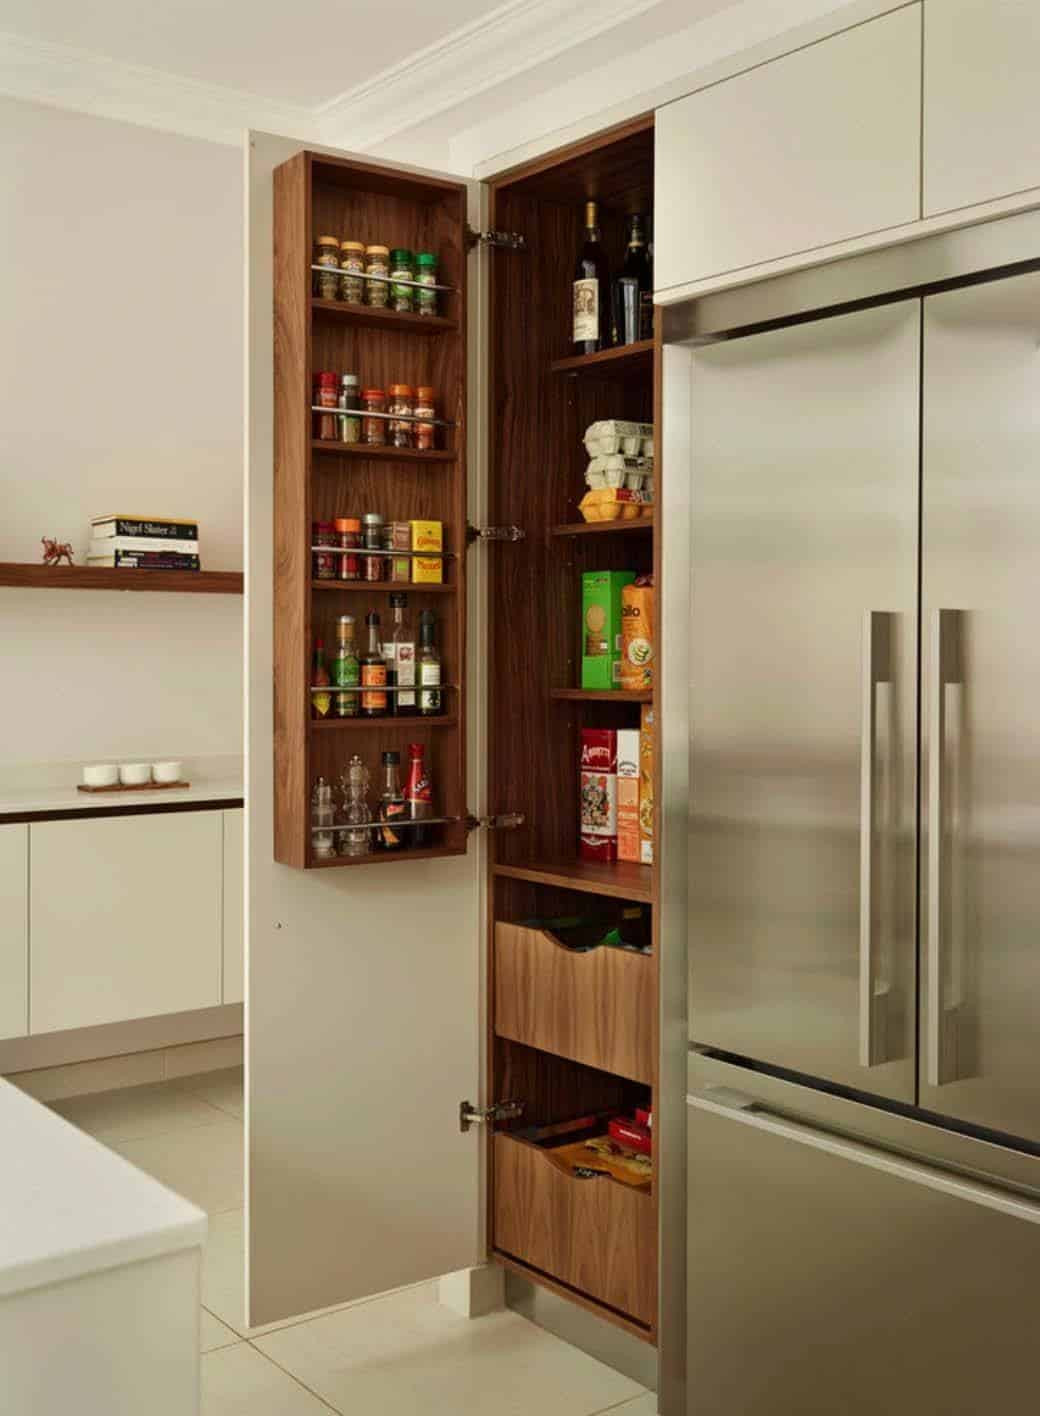 Kitchen Pantry Design Ideas
 35 Clever ideas to help organize your kitchen pantry